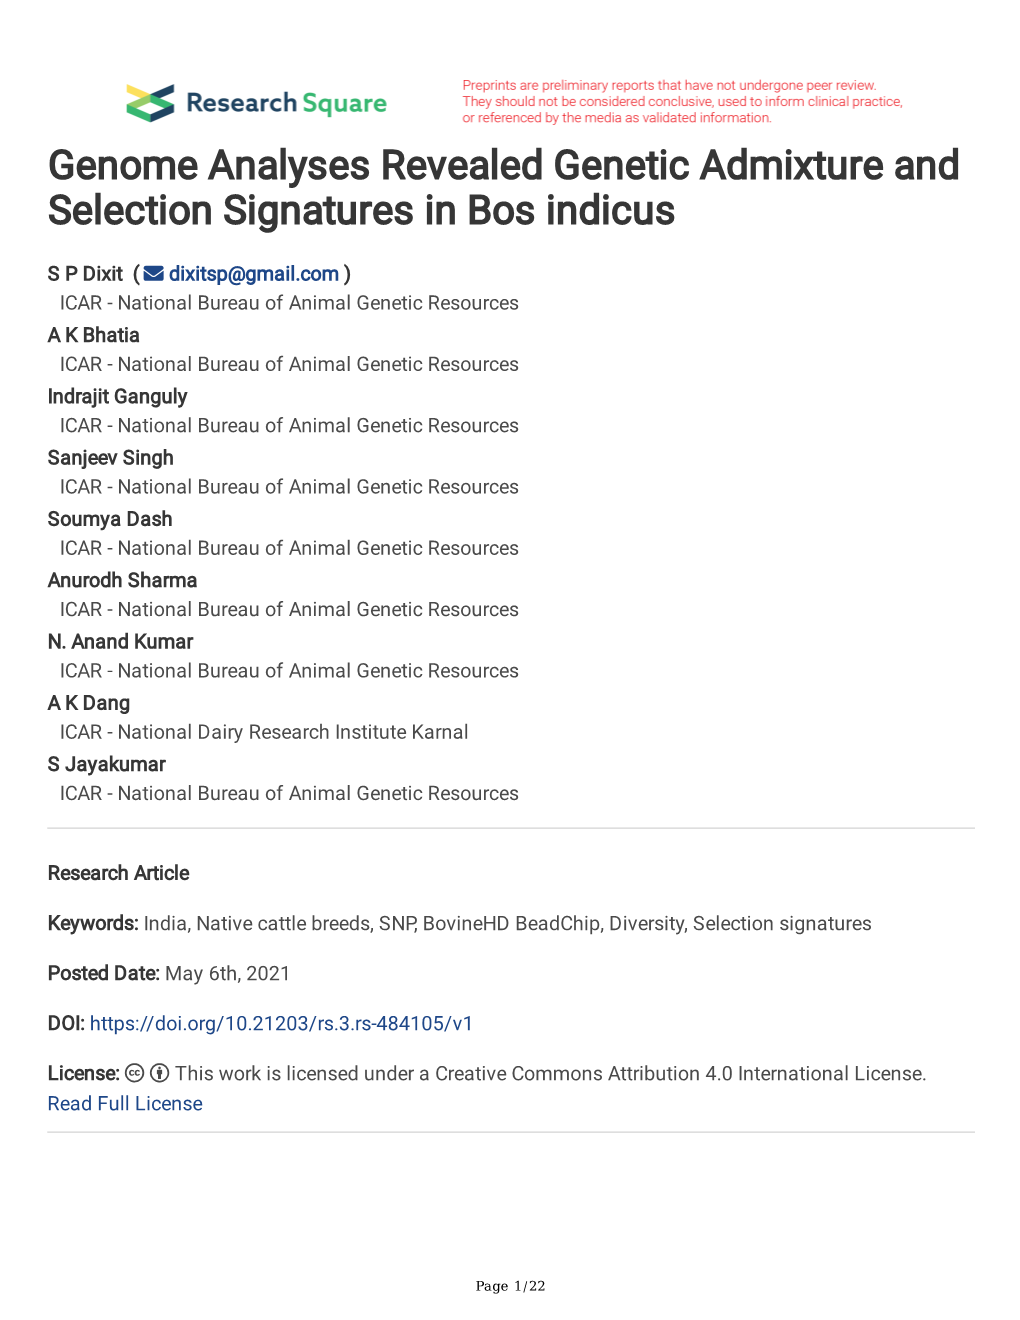 Genome Analyses Revealed Genetic Admixture and Selection Signatures in Bos Indicus